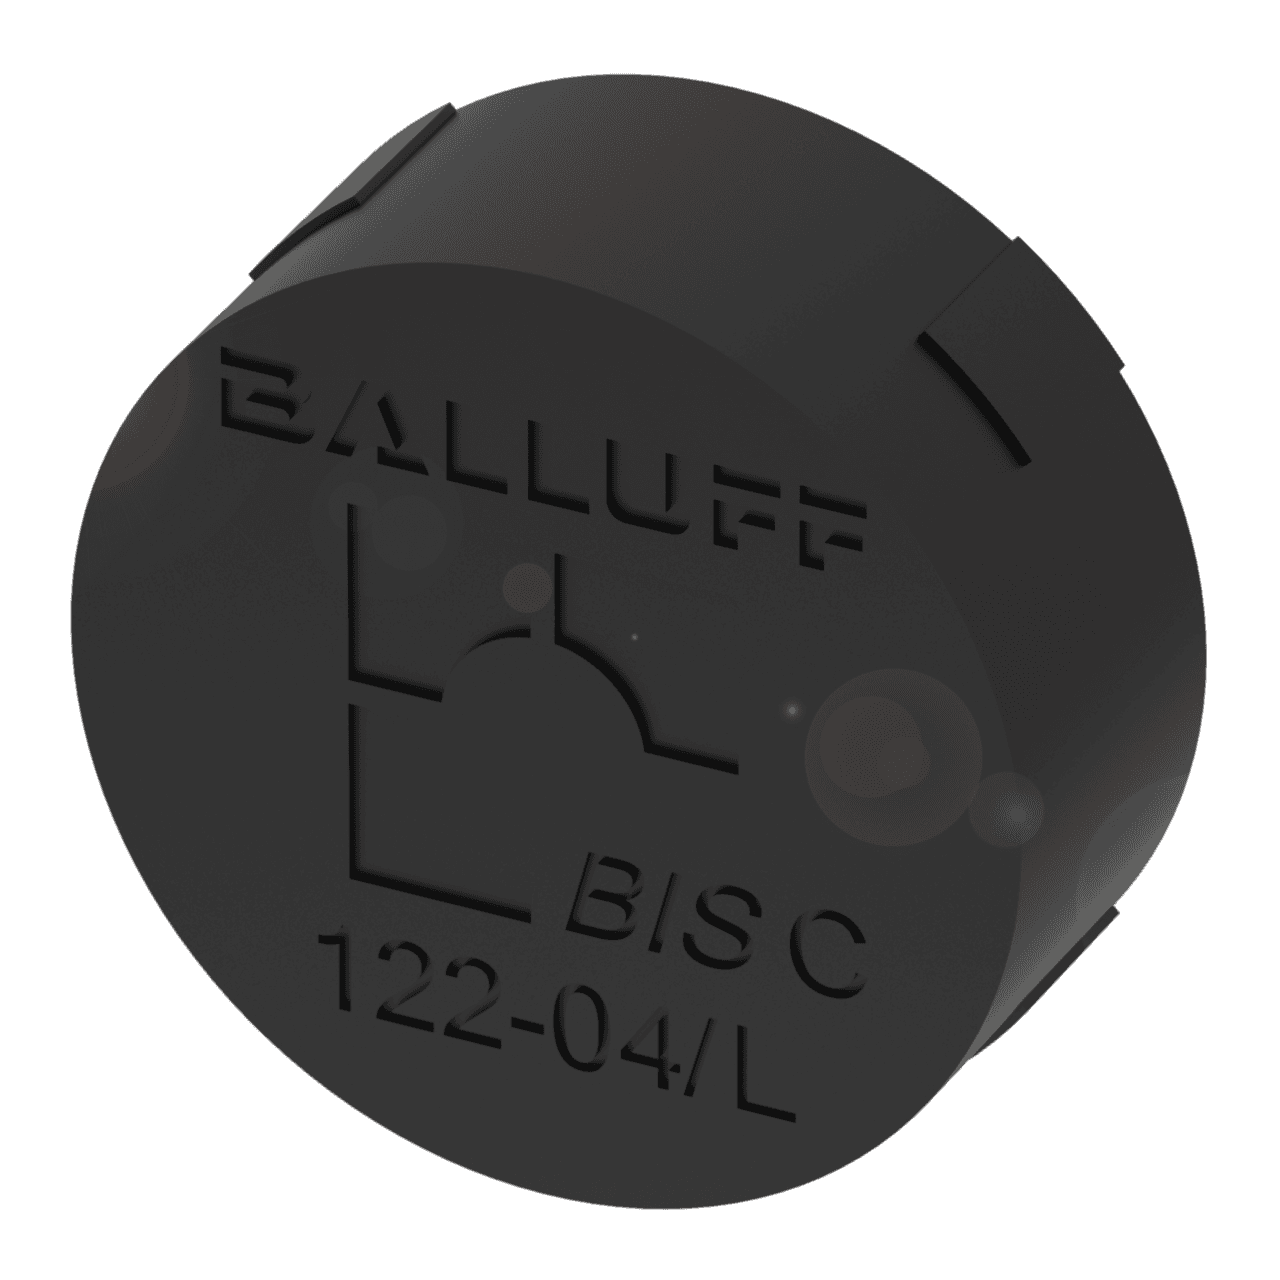 Balluff BIS0011 LF data carriers (70/455 kHz), Product Group: LF (70/455 kHz), Dimension: Ø 10 x 4.5 mm, Antenna type: round, Memory type: EEPROM, User data, read/write: 511 Byte, Storage temperature: -30...85 °C, Ambient temperature: 0...70 °C